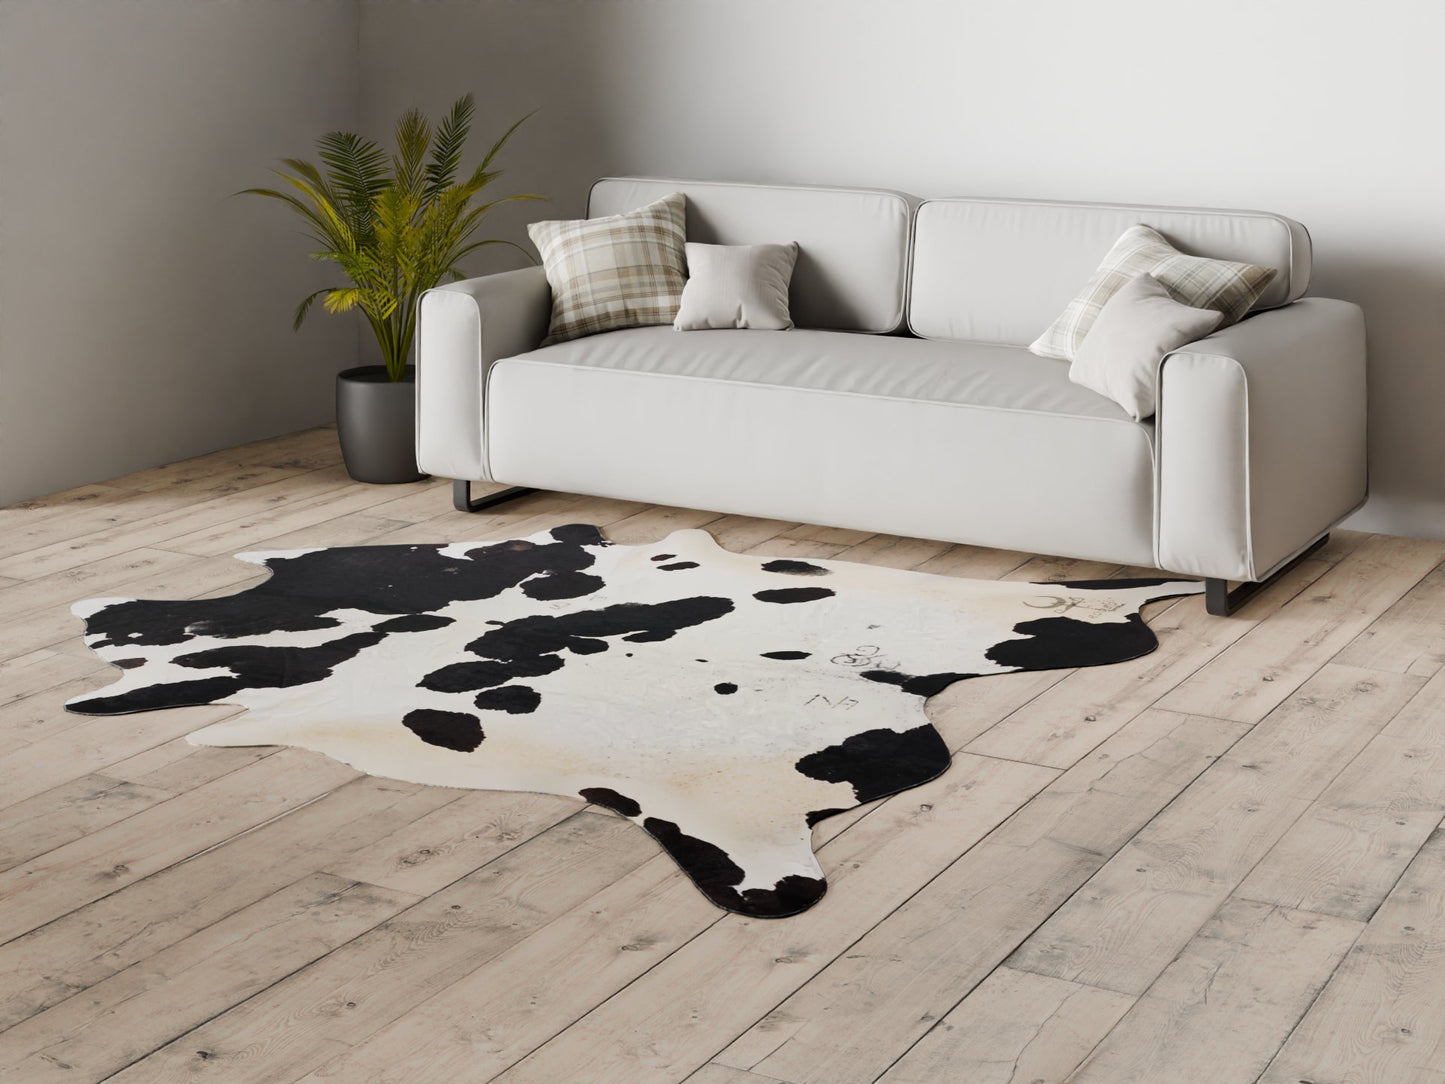 Black and White Cowhide Rug Size 7x8 ft---4672 - Rodeo Cowhide Rugs